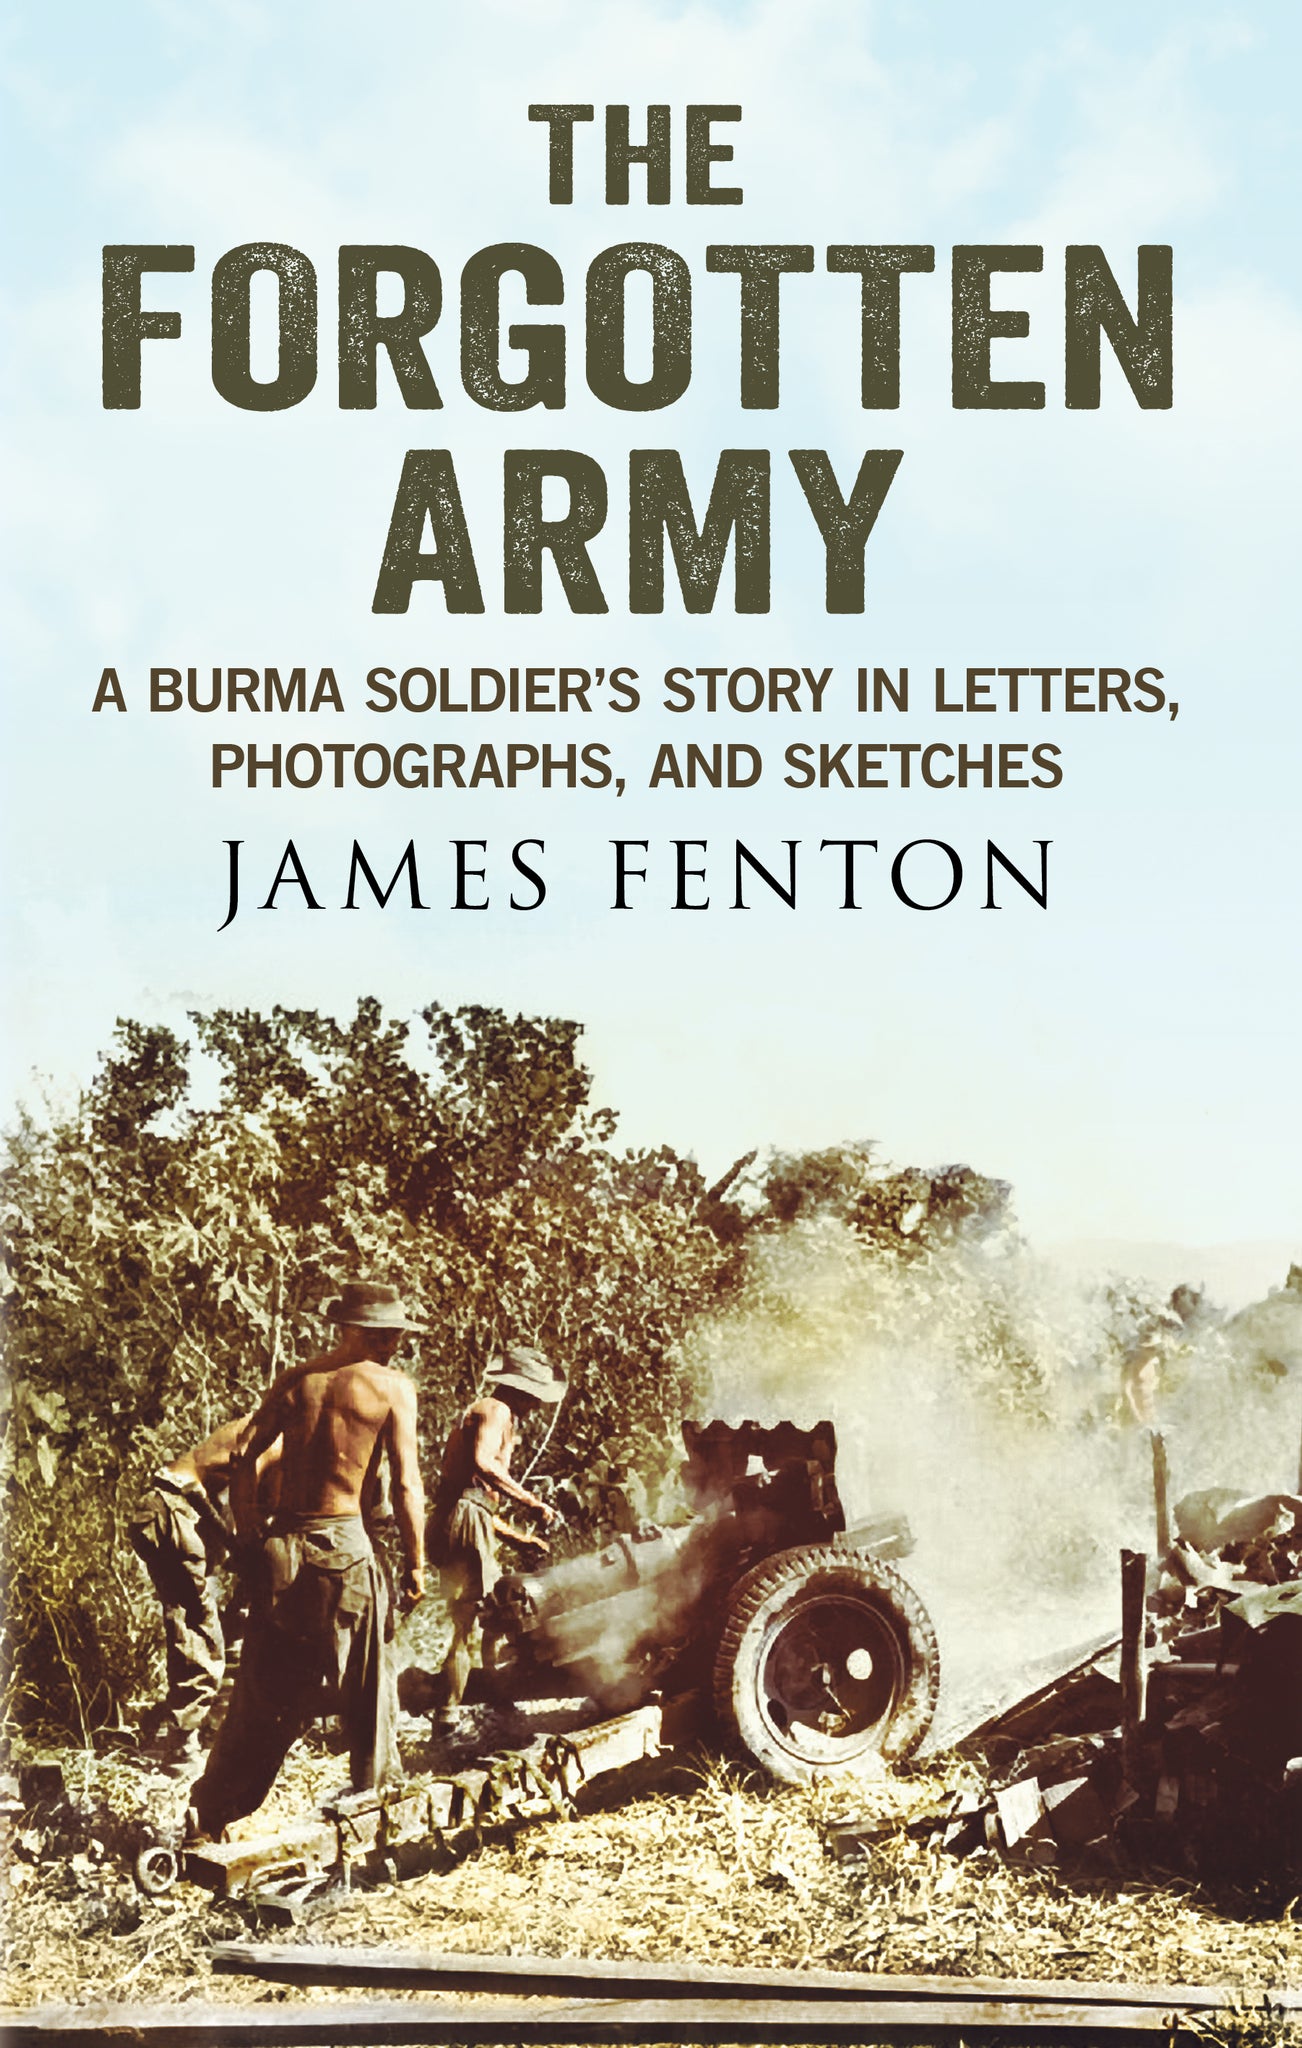 The Forgotten Army: A Burma Soldier's Story in Letters, Photographs and Sketches